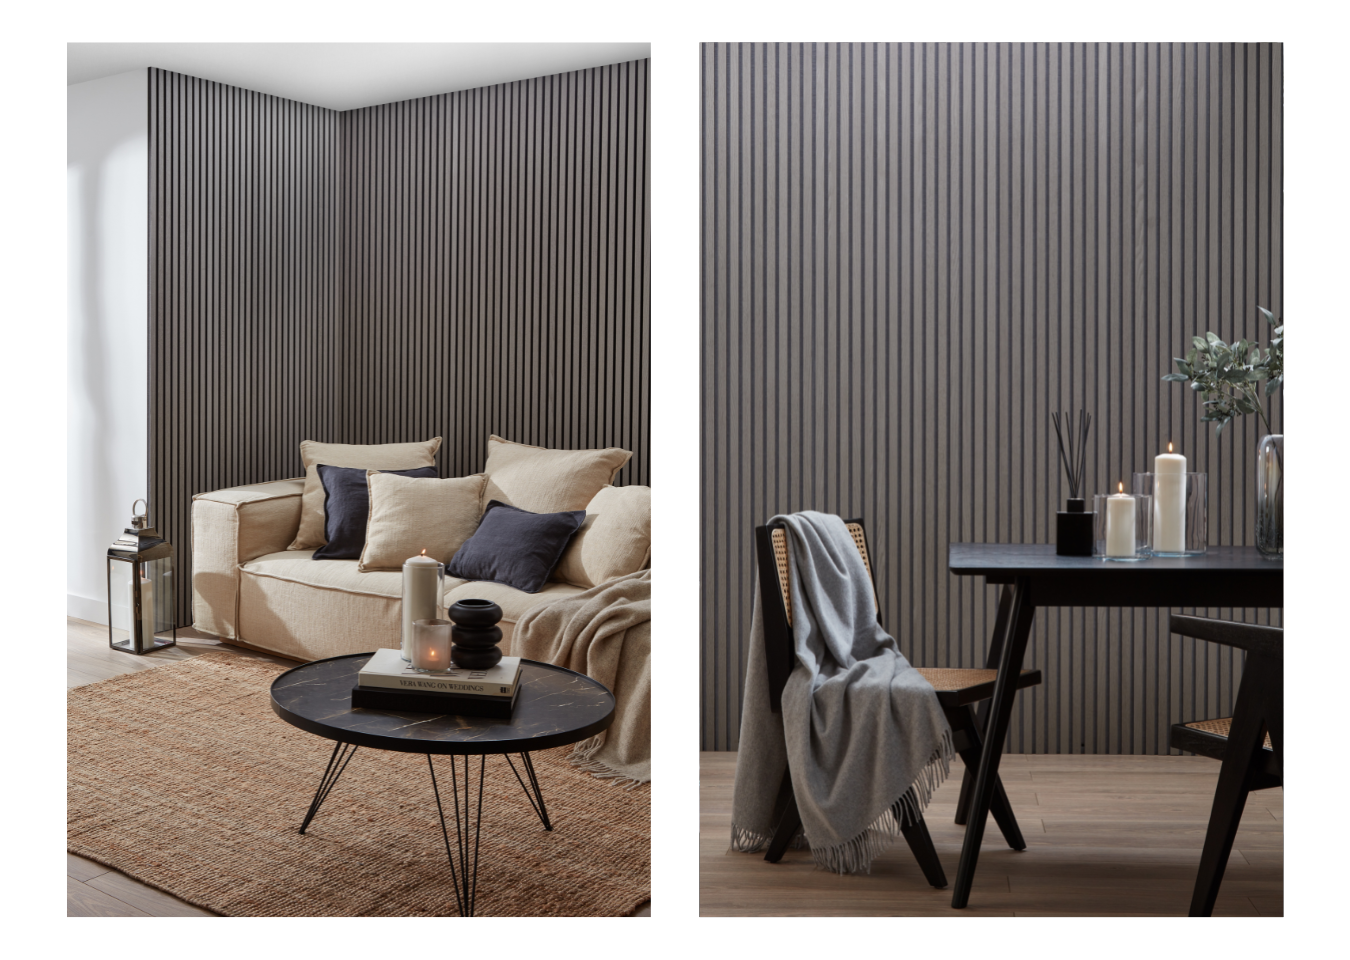 Two images, on the left is shows a living room with a slatwall background, there is a beige sofa and a coffee table. on the right there is a dining room with a grey slatwall background, there is a black table with black chairs with a rattan backing